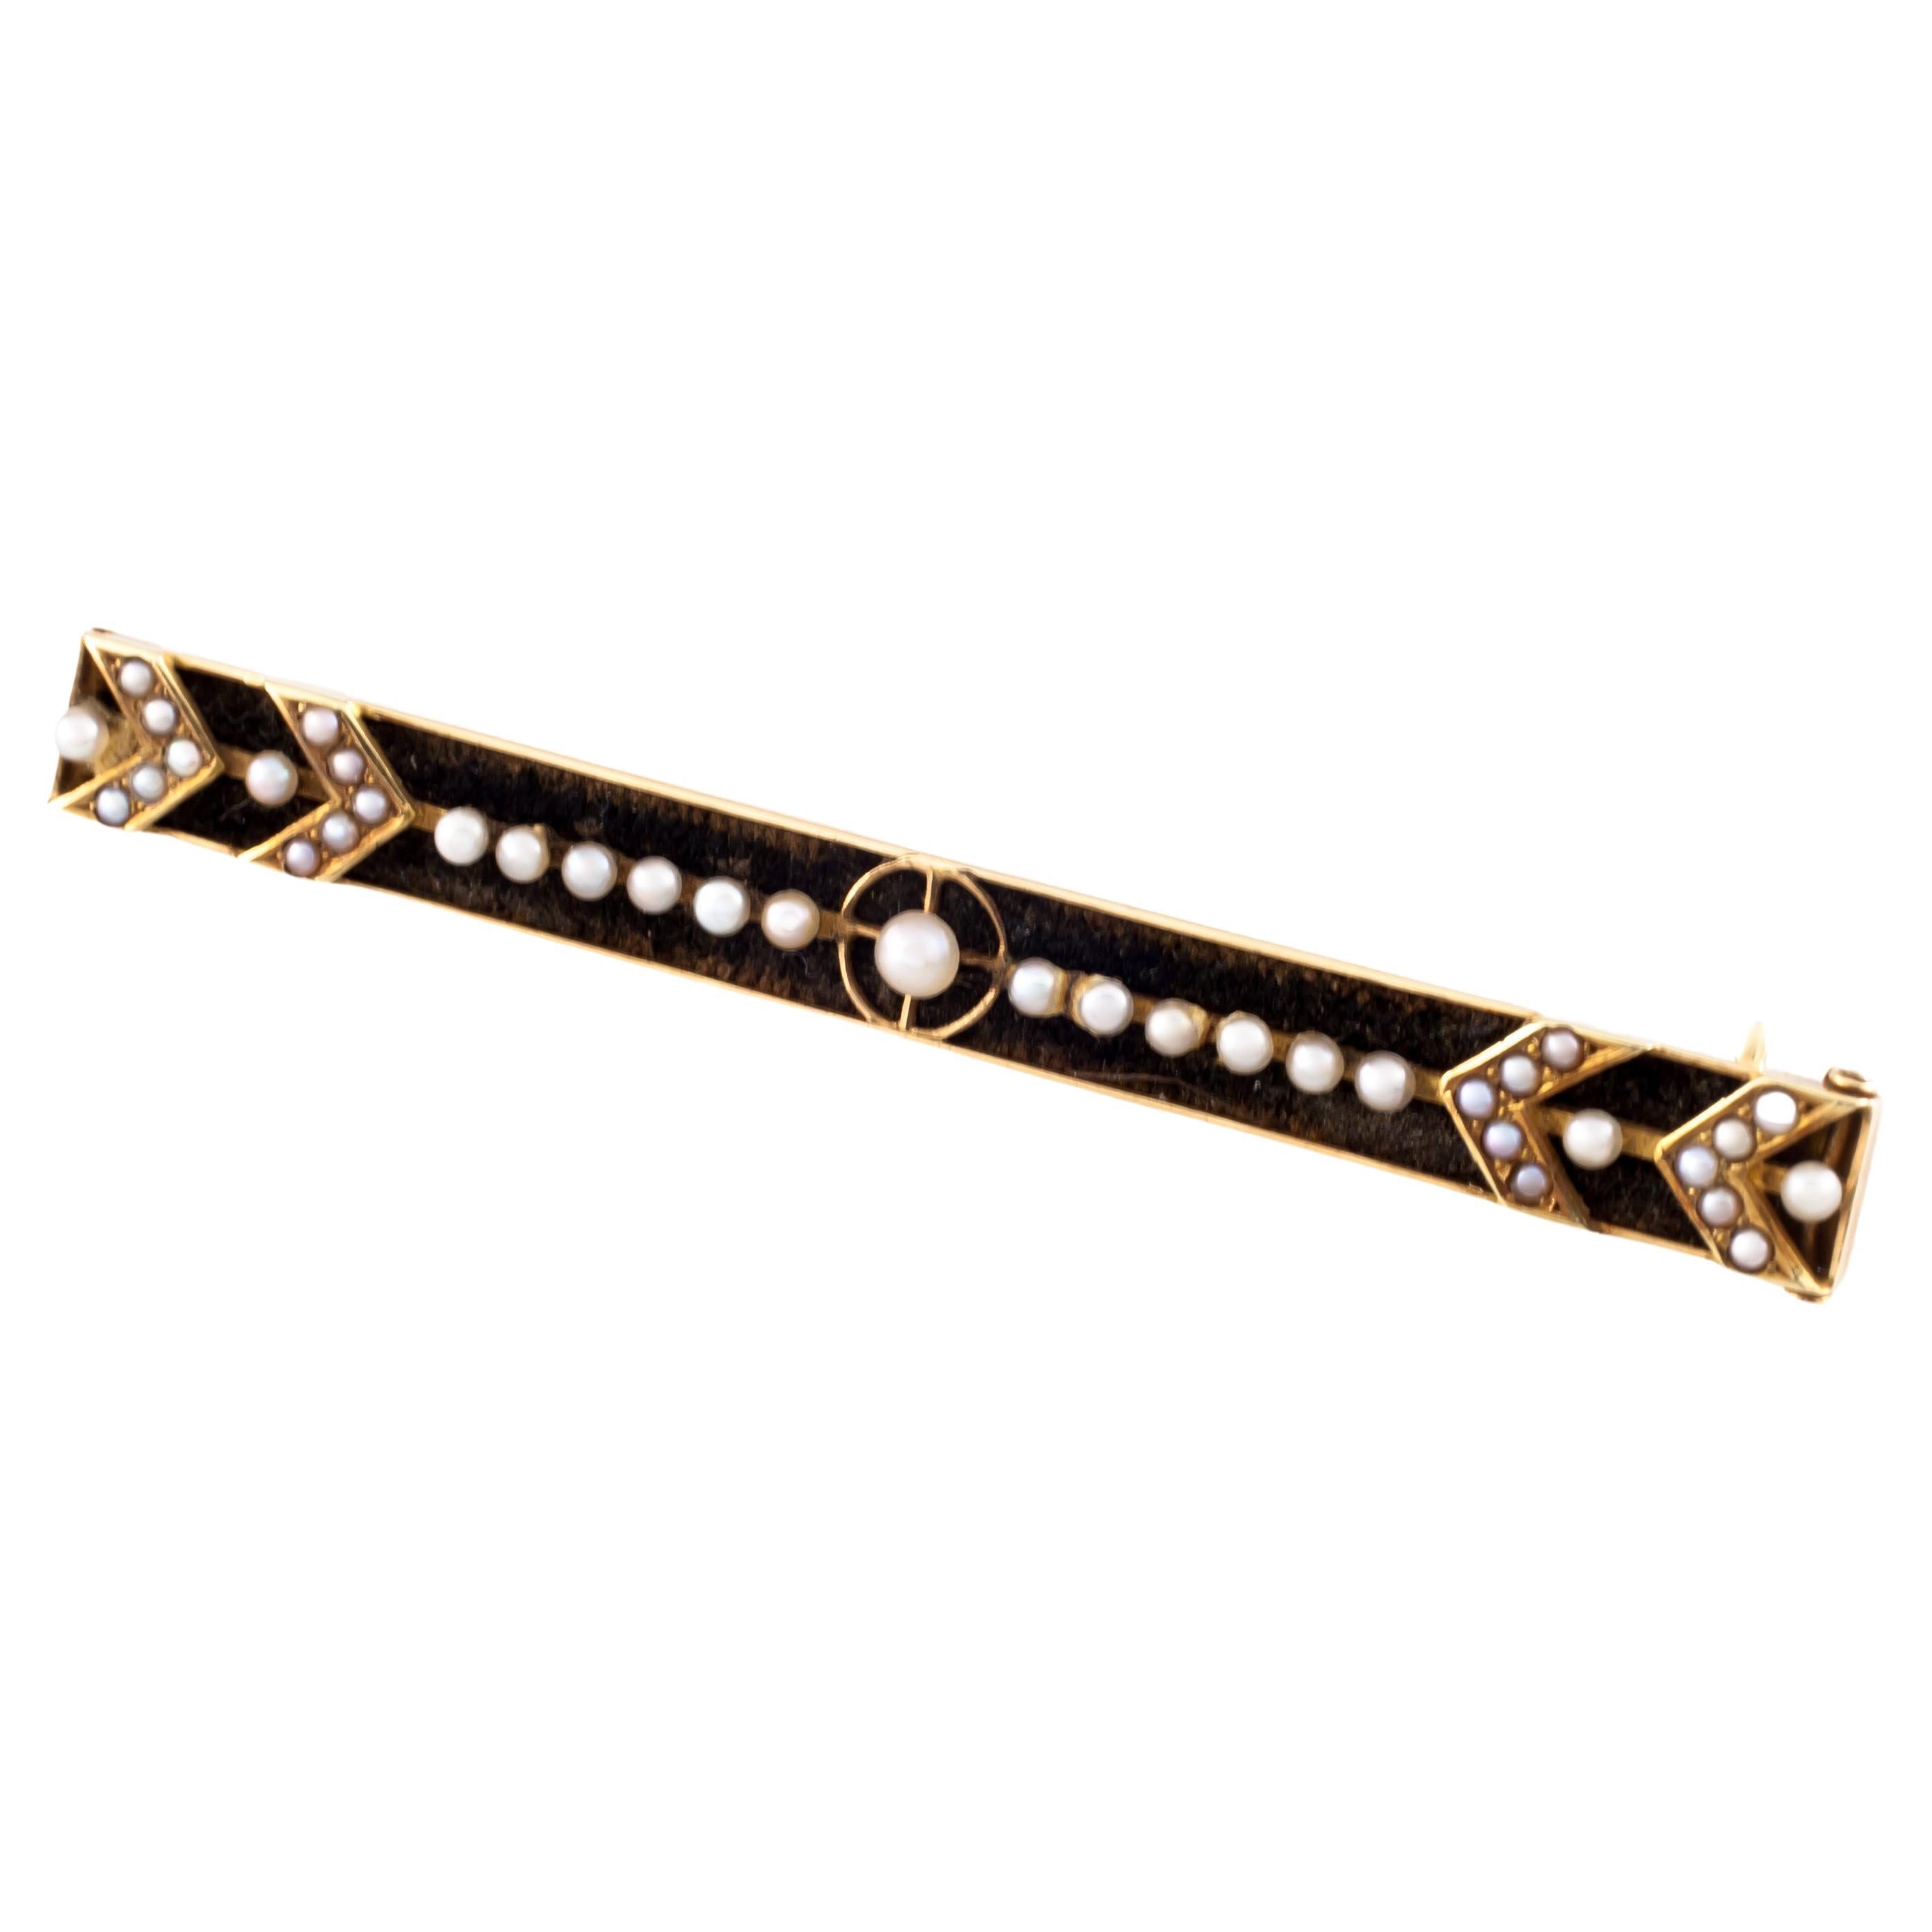 Vintage 14k Yellow Gold Brooch/Tie Bar with Seed Pearls